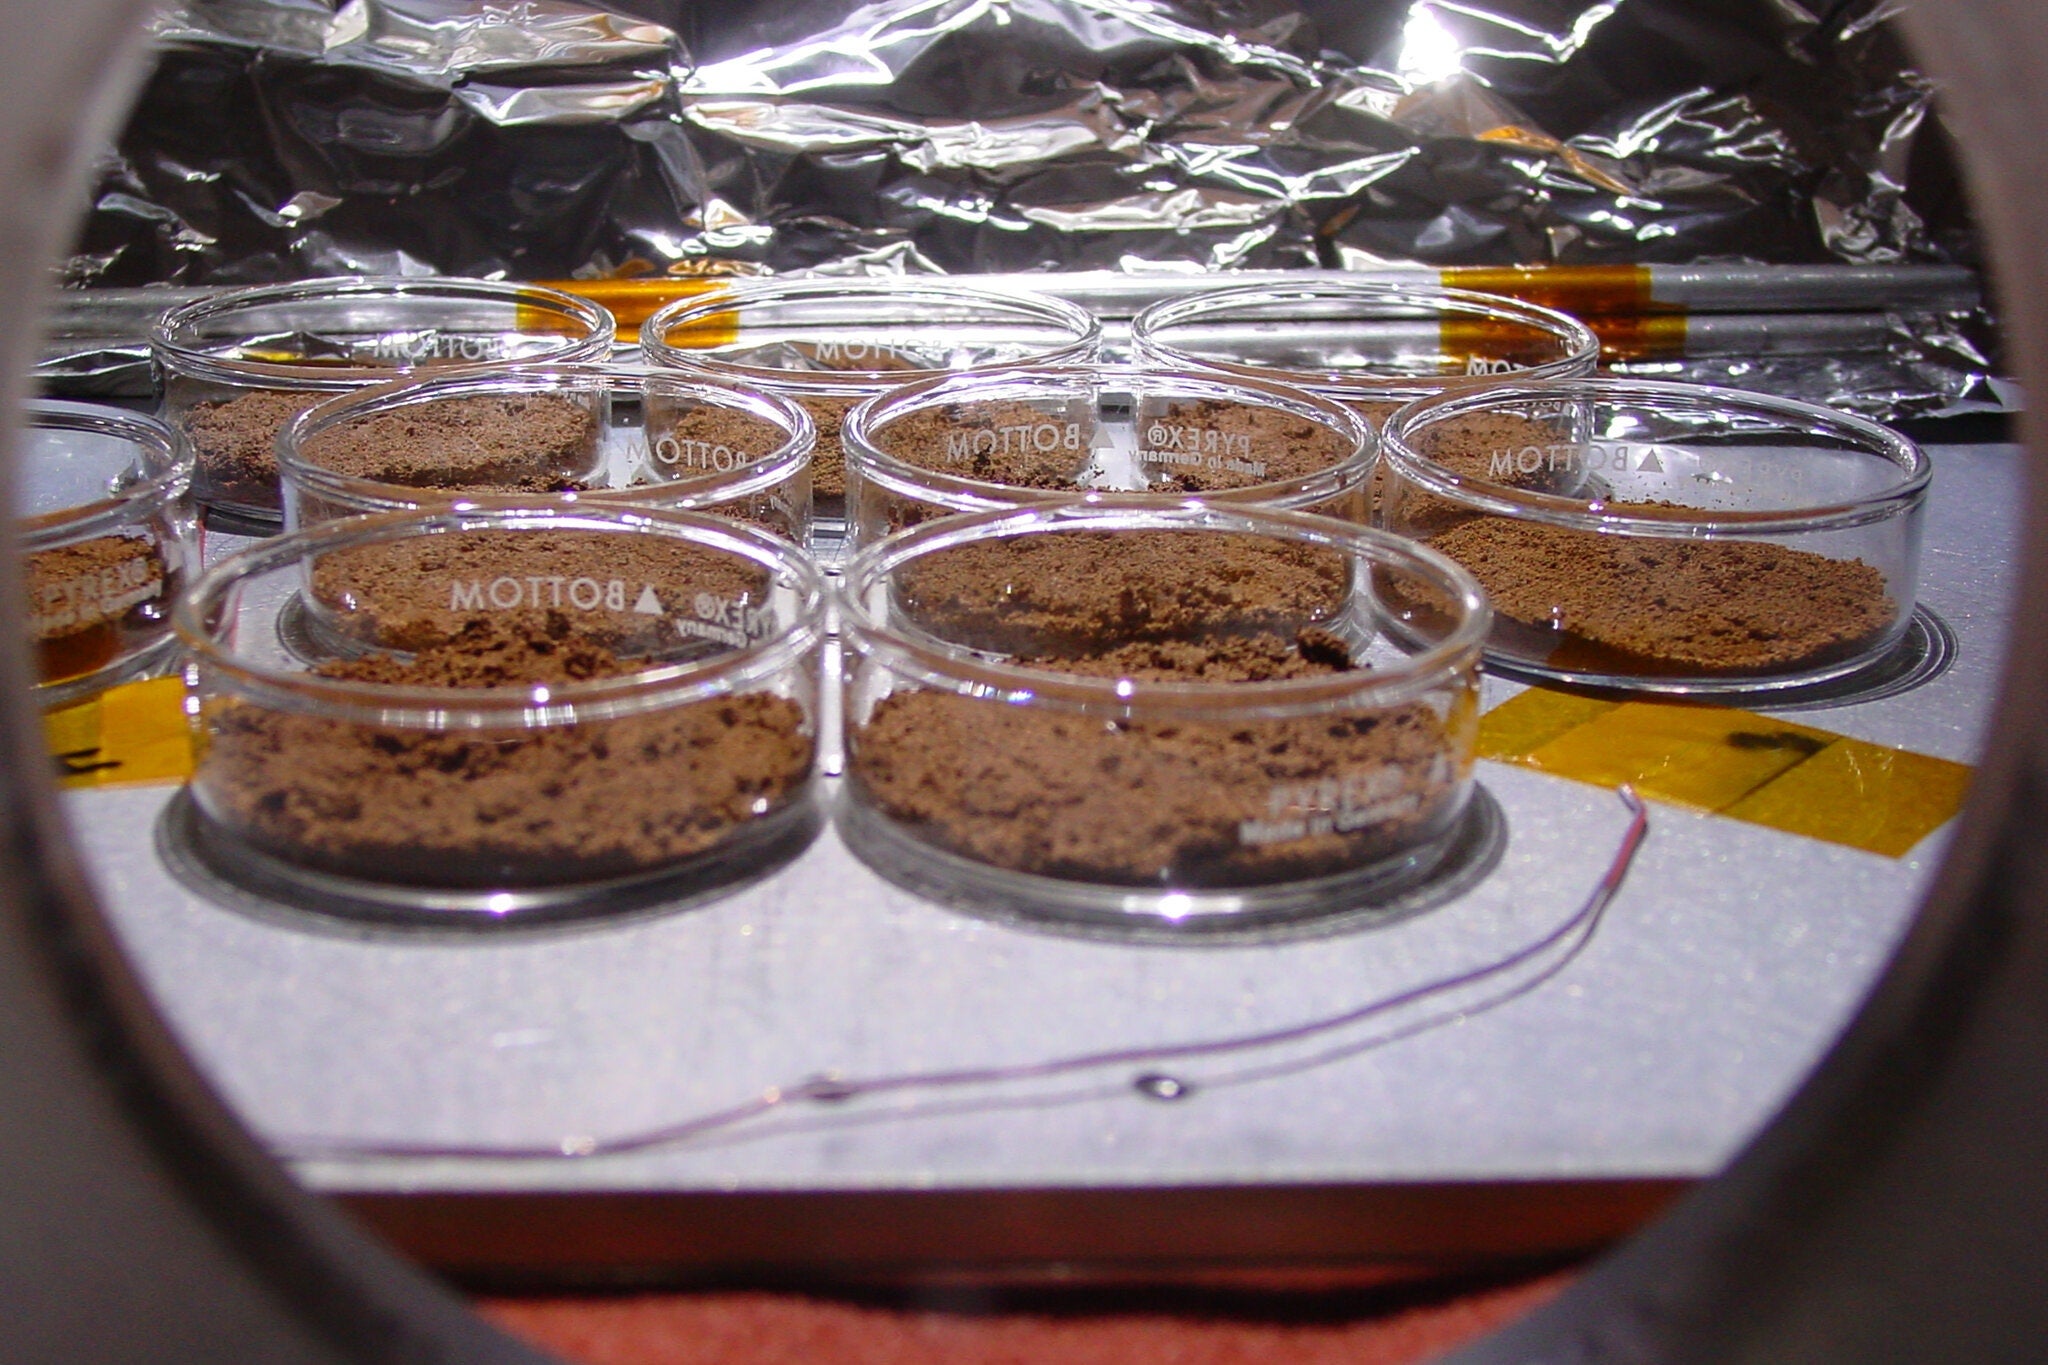 &#13;
An experiment in a so-called 'Mars Jar,' a pressurized chamber to simulate the environment on Mars, containing Mars analog soil with E coli bacteria mixed in, at the University of Florida &#13;